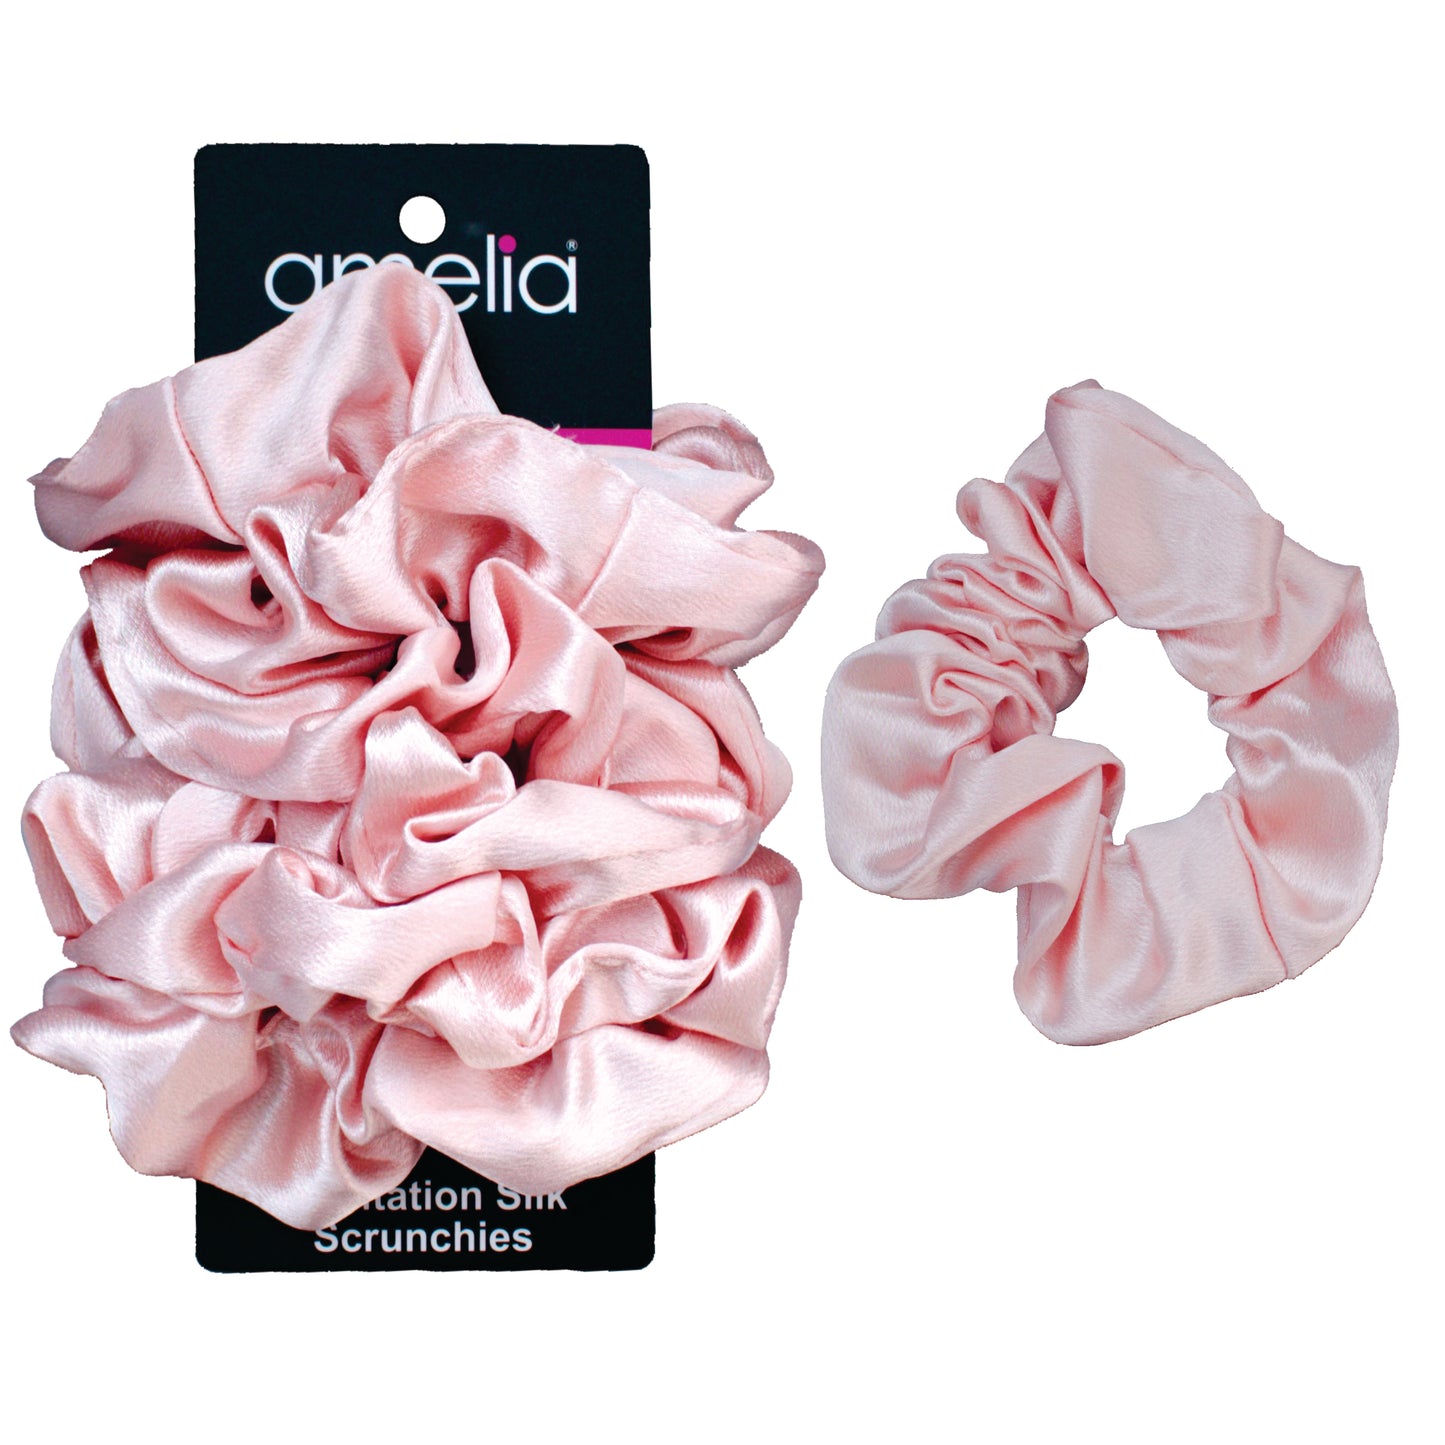 Amelia Beauty, Pink Imitation Silk Scrunchies, 4.5in Diameter, Gentle on Hair, Strong Hold, No Snag, No Dents or Creases. 6 Pack